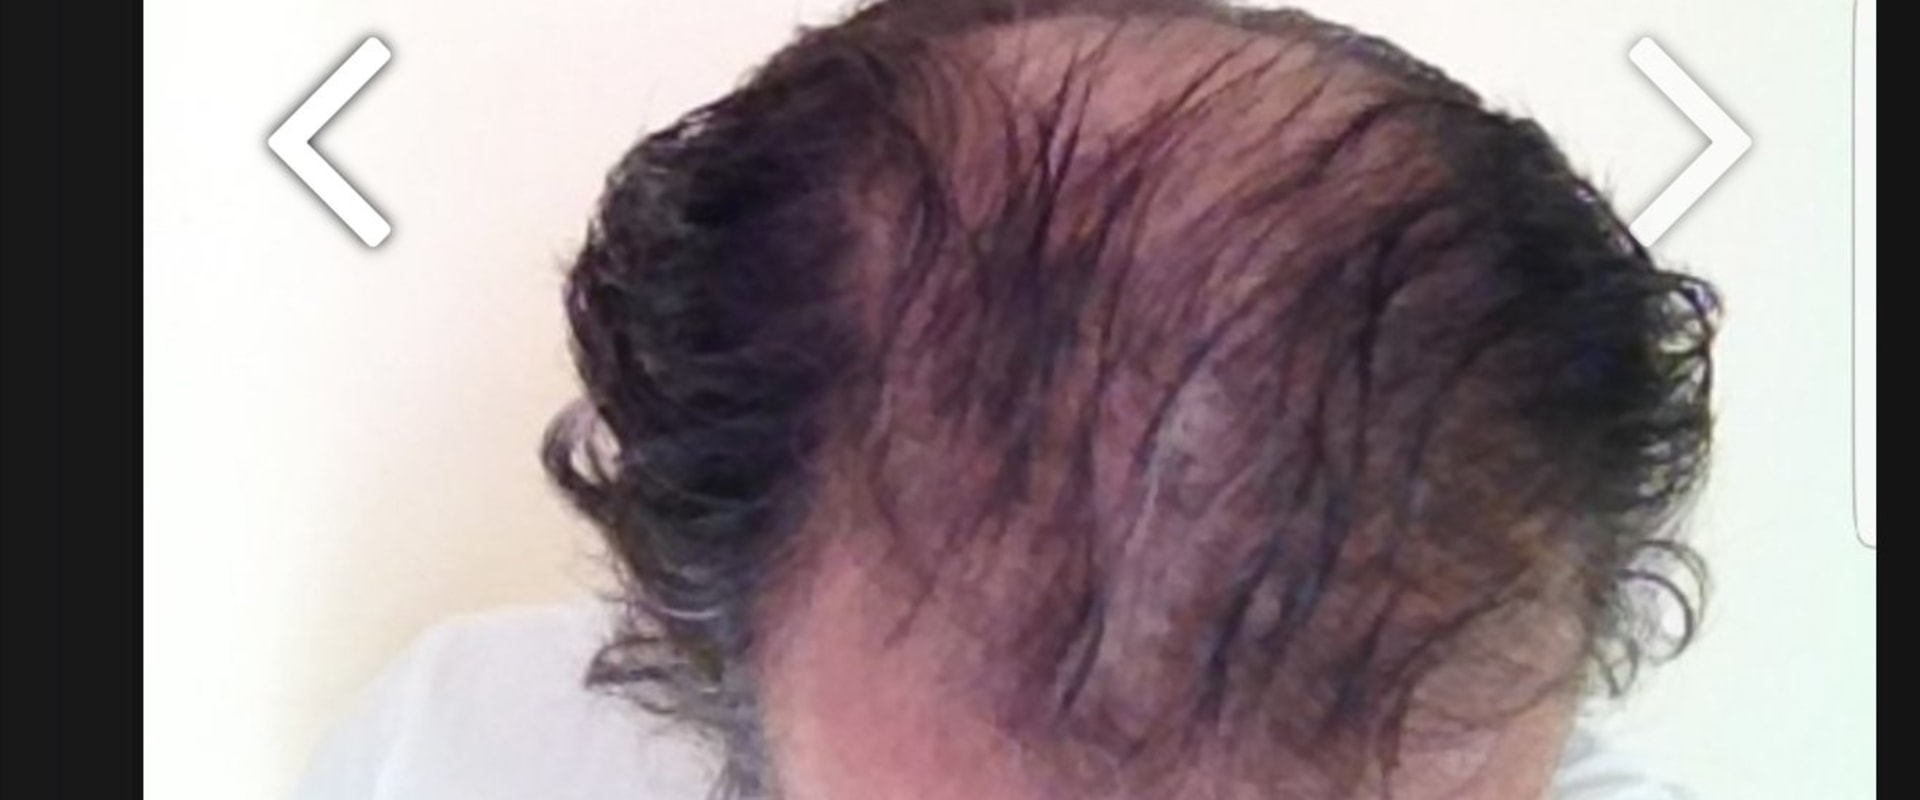 Is Hair Transplant an Illusion?